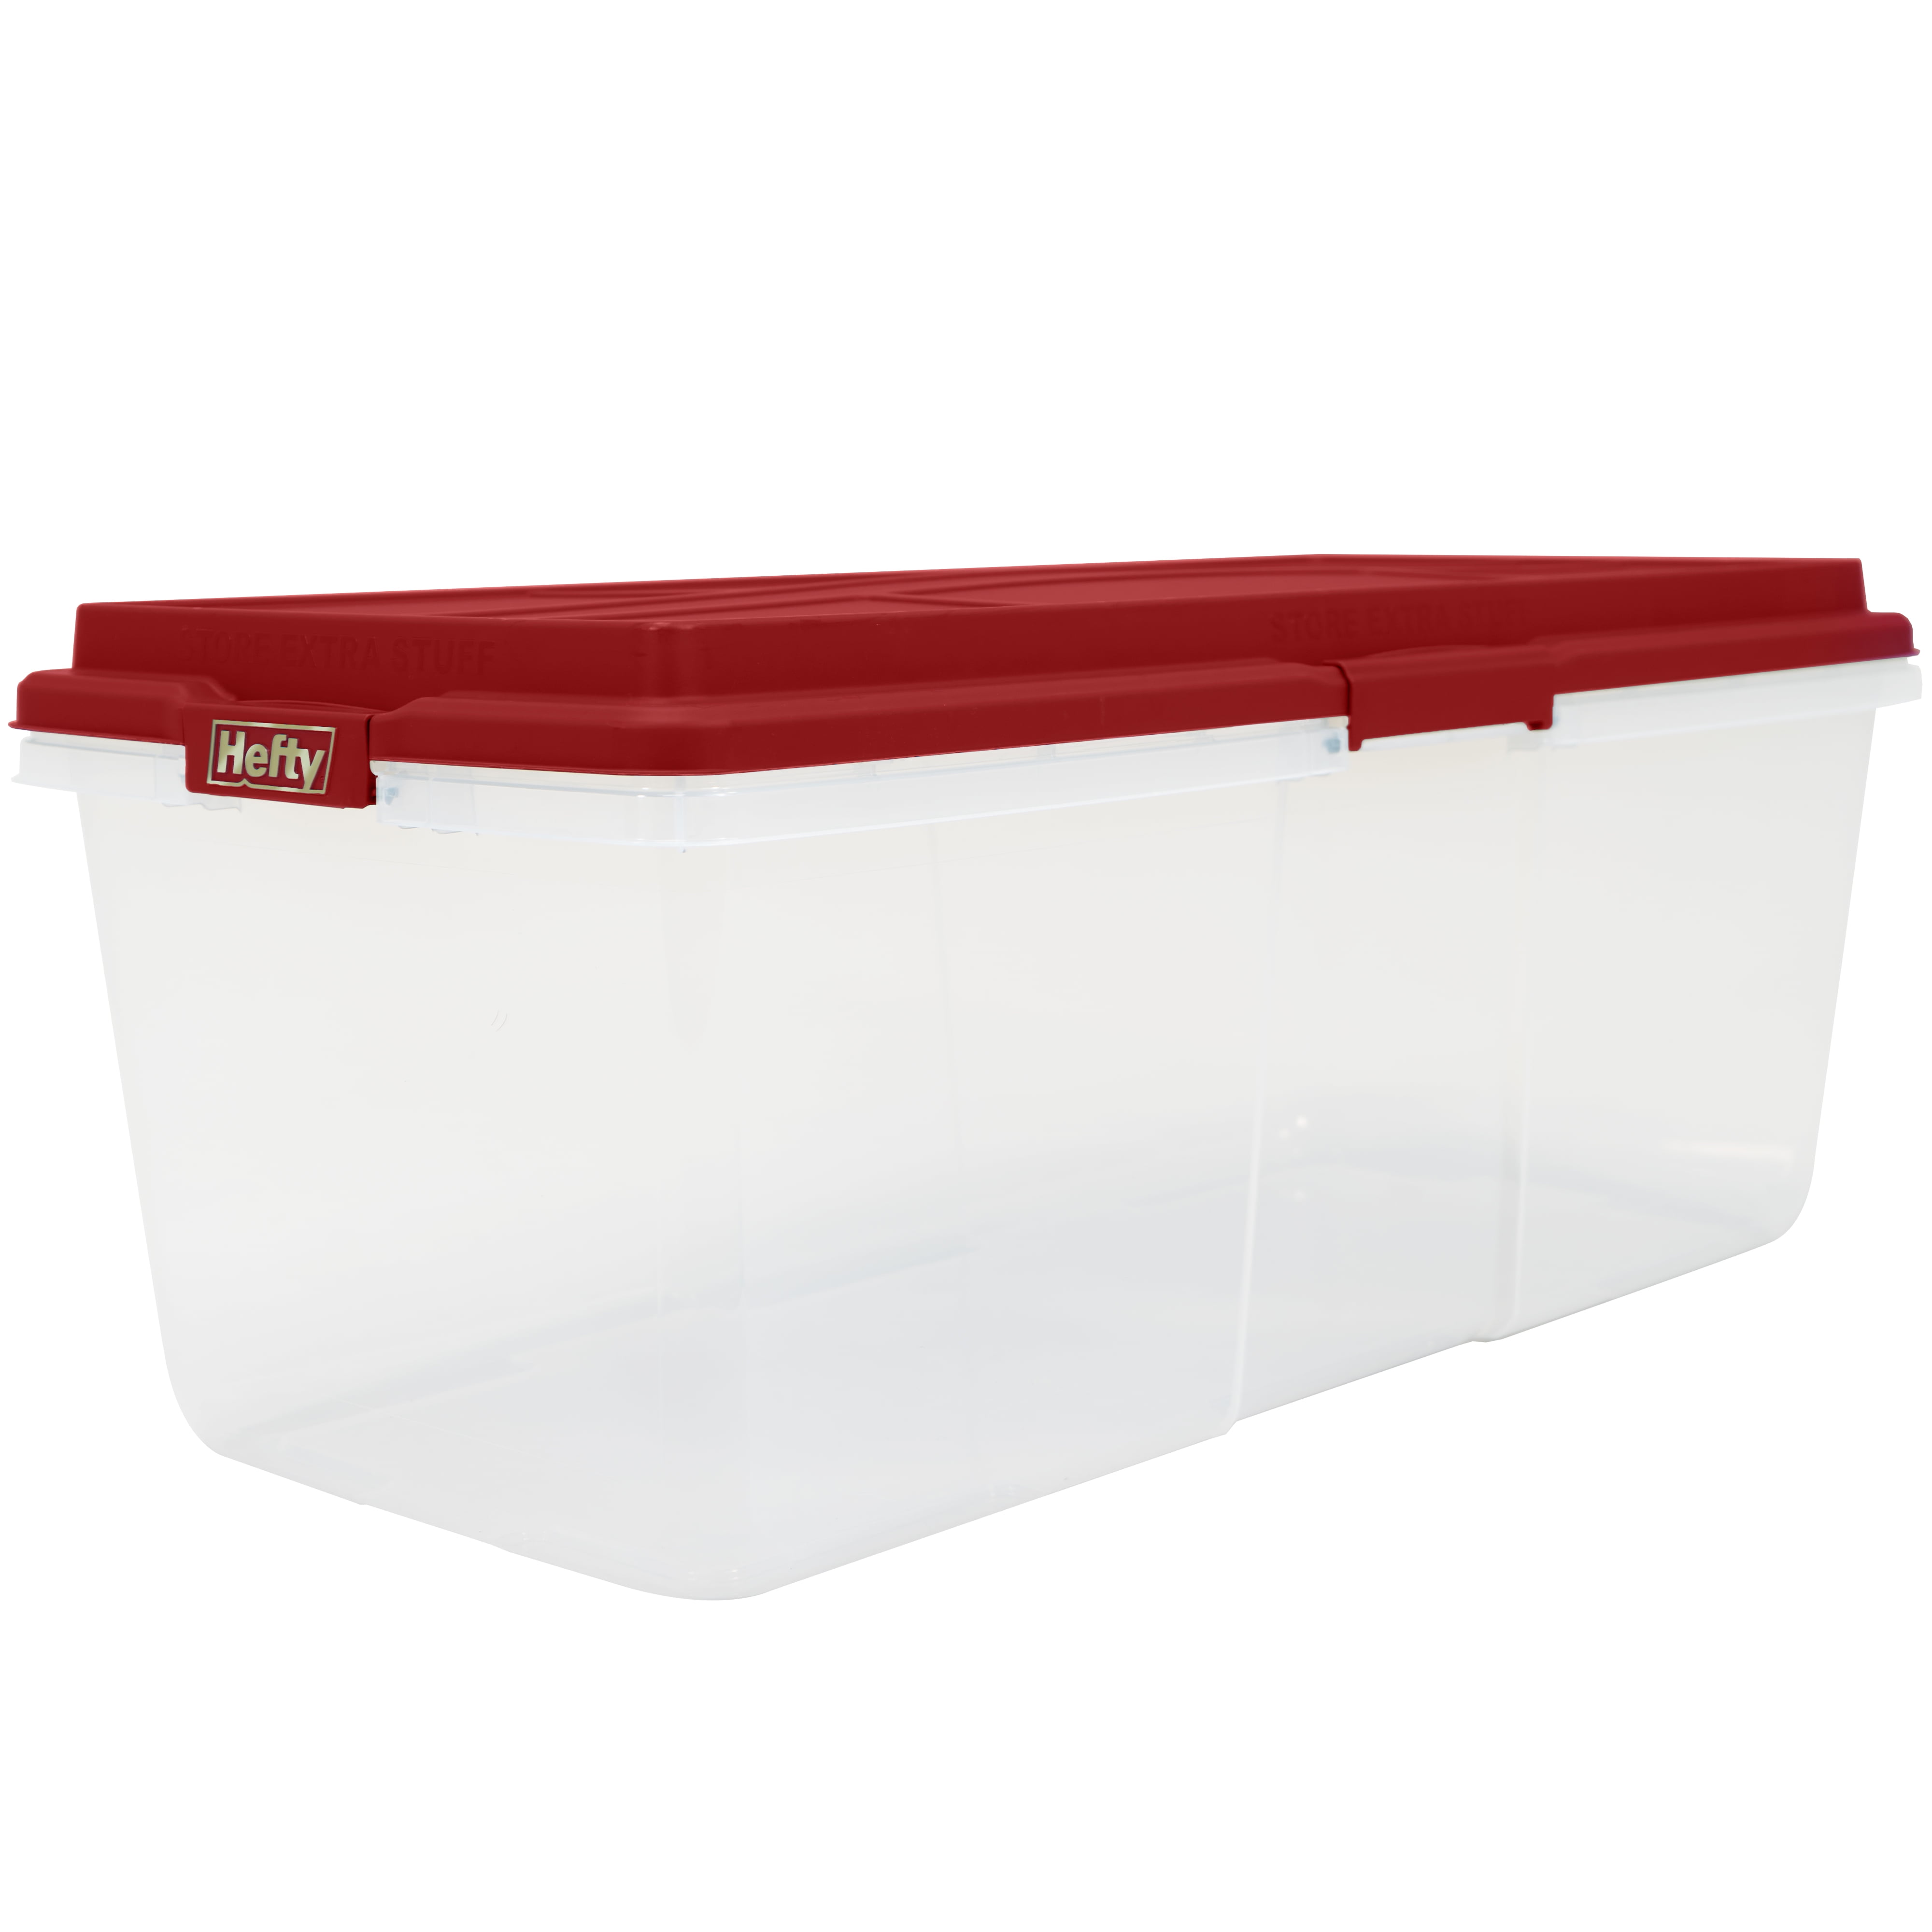 Wholesale Mr. Handy 3pk 2 Dividers Rectangular Food Container Set- 30oz RED  LID CLEAR CONTAINER